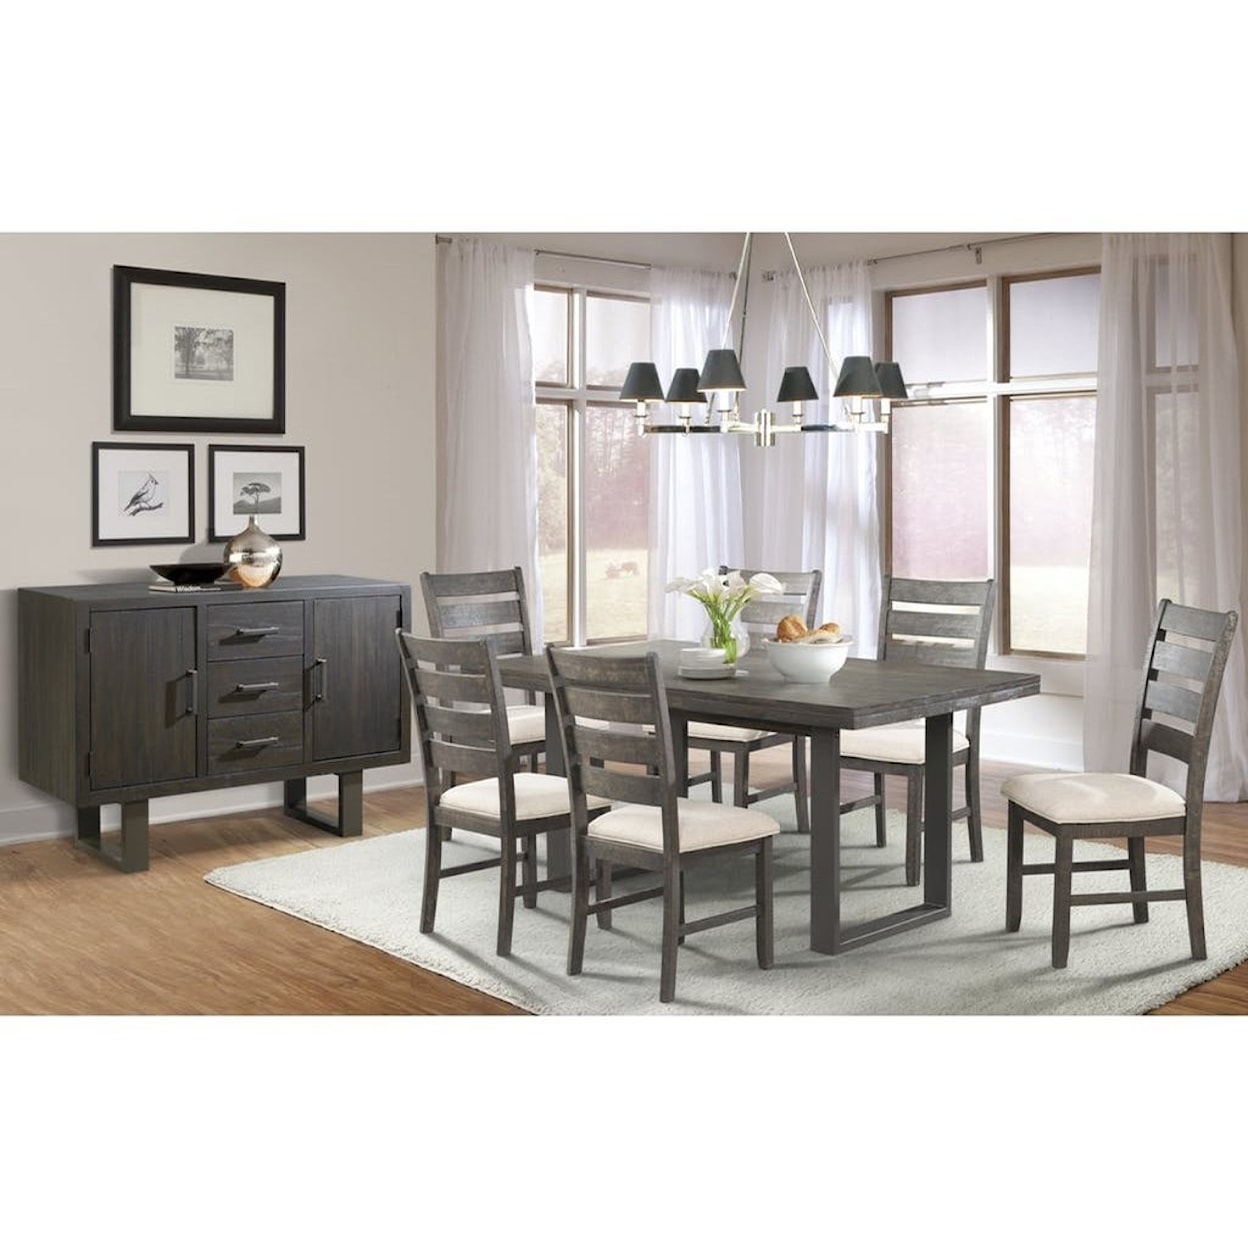 Elements Sawyer Dining Group with Six Chairs